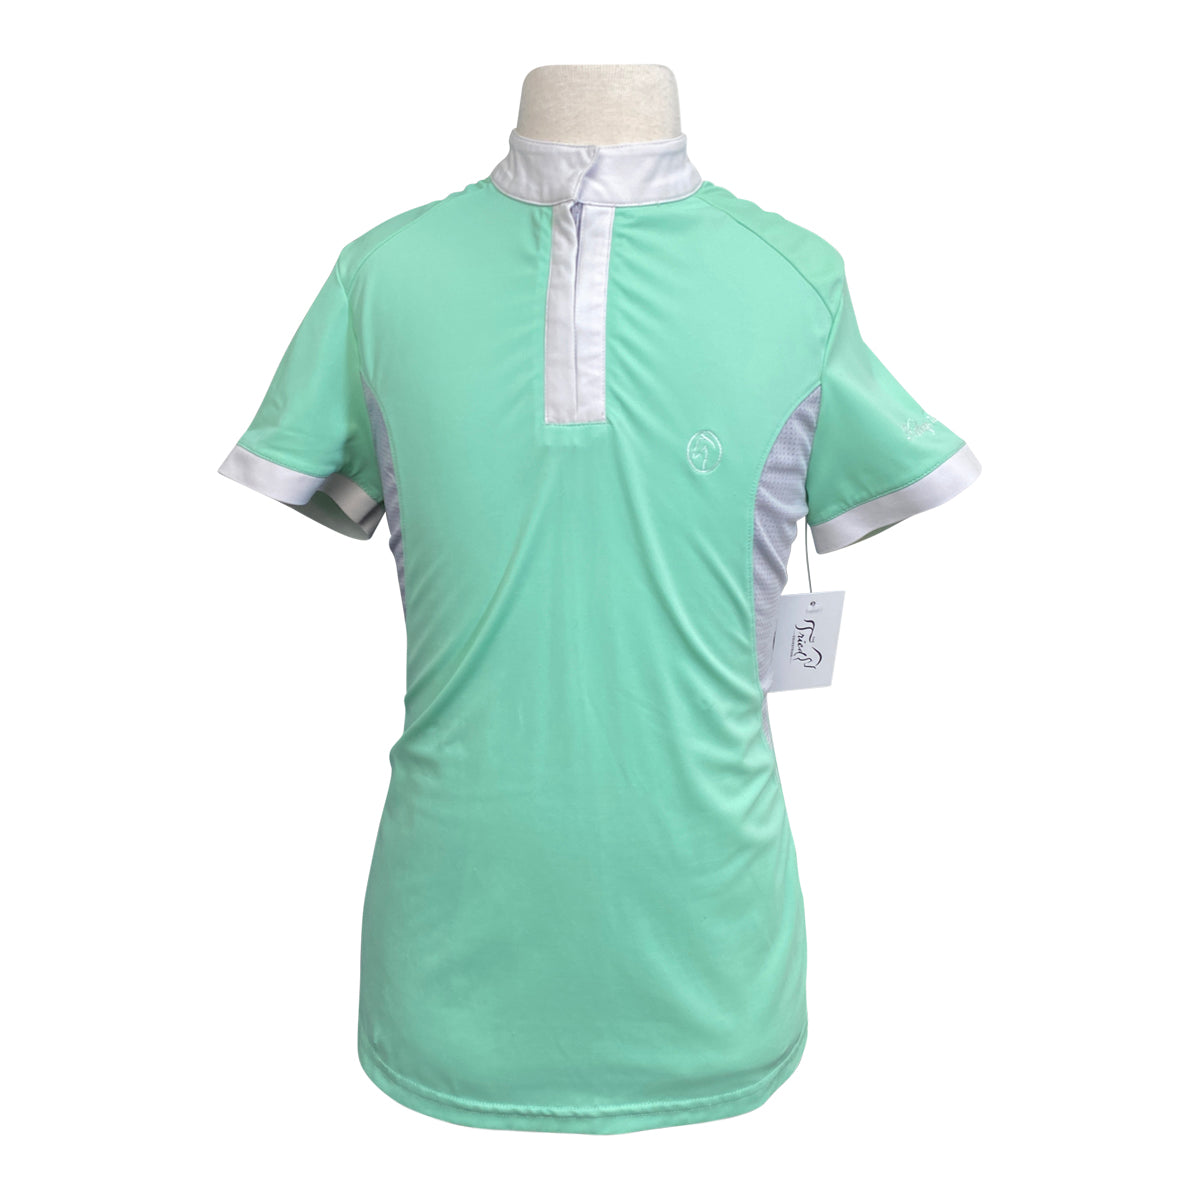 Kathryn Lily Competition Shirt in Mint 